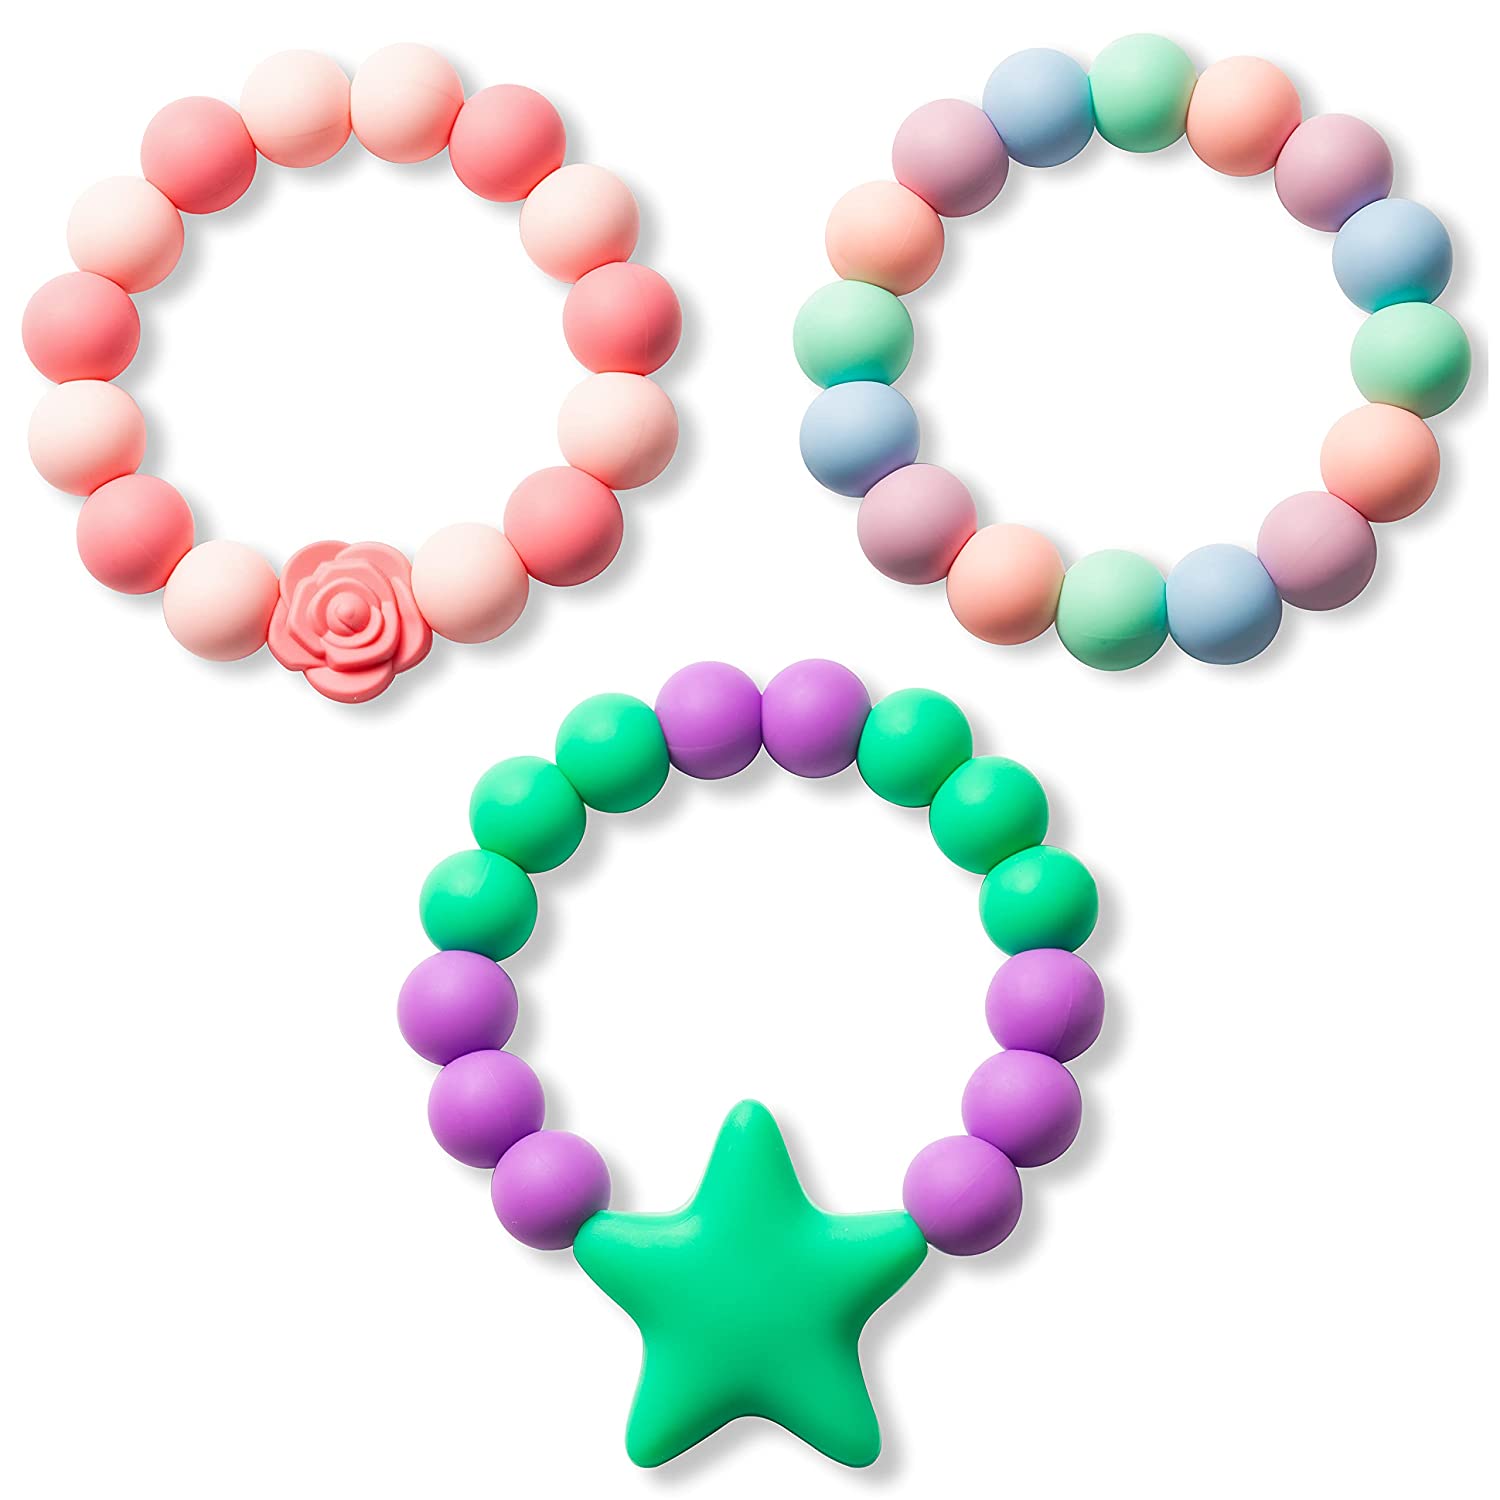 2 Pcs Sensory Chew Necklace Bracelet for Baby Silicone Chewable Jewelry Pink Purple Teether Necklace Autism ADHD SPD Baby Oral Motor Chewing Beads Bracelet Biting Teething Toy